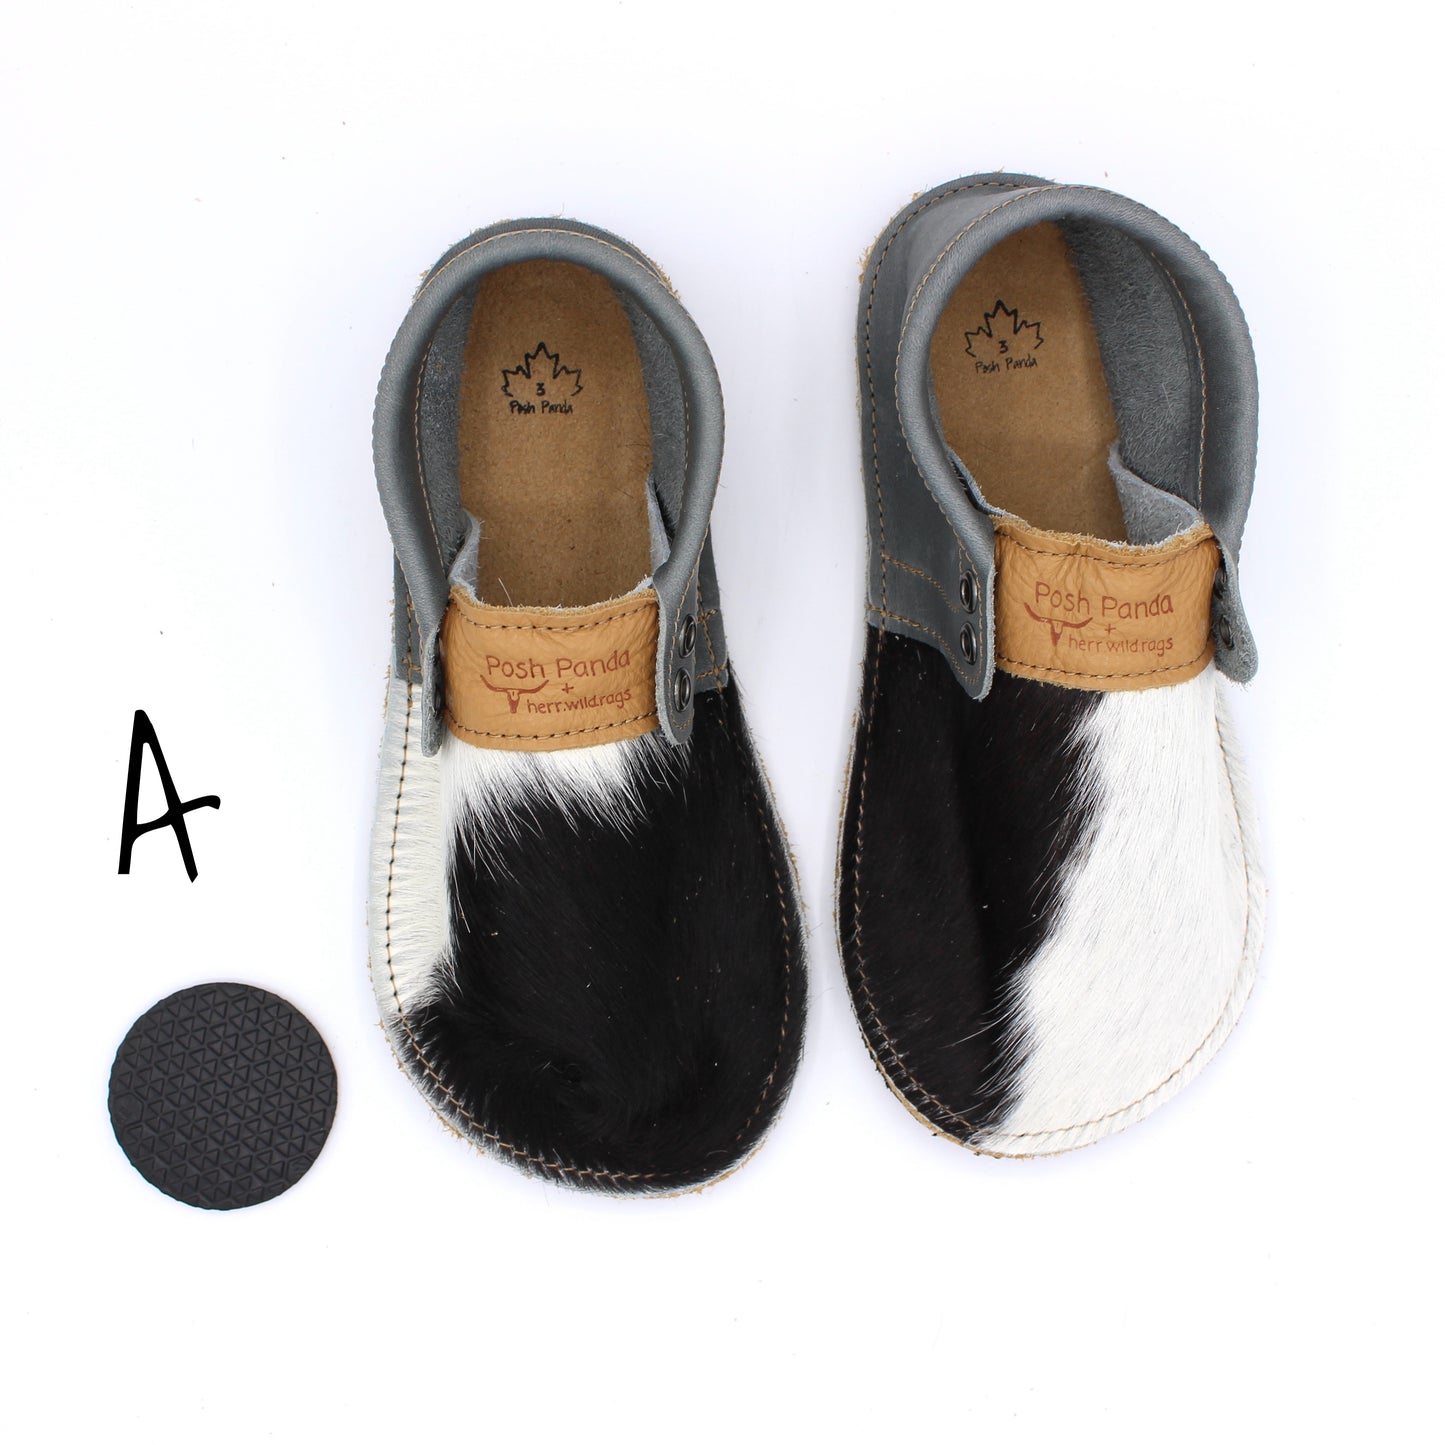 Hair Hide Mocs - YOUTH - Size 3 (4mm Soles)